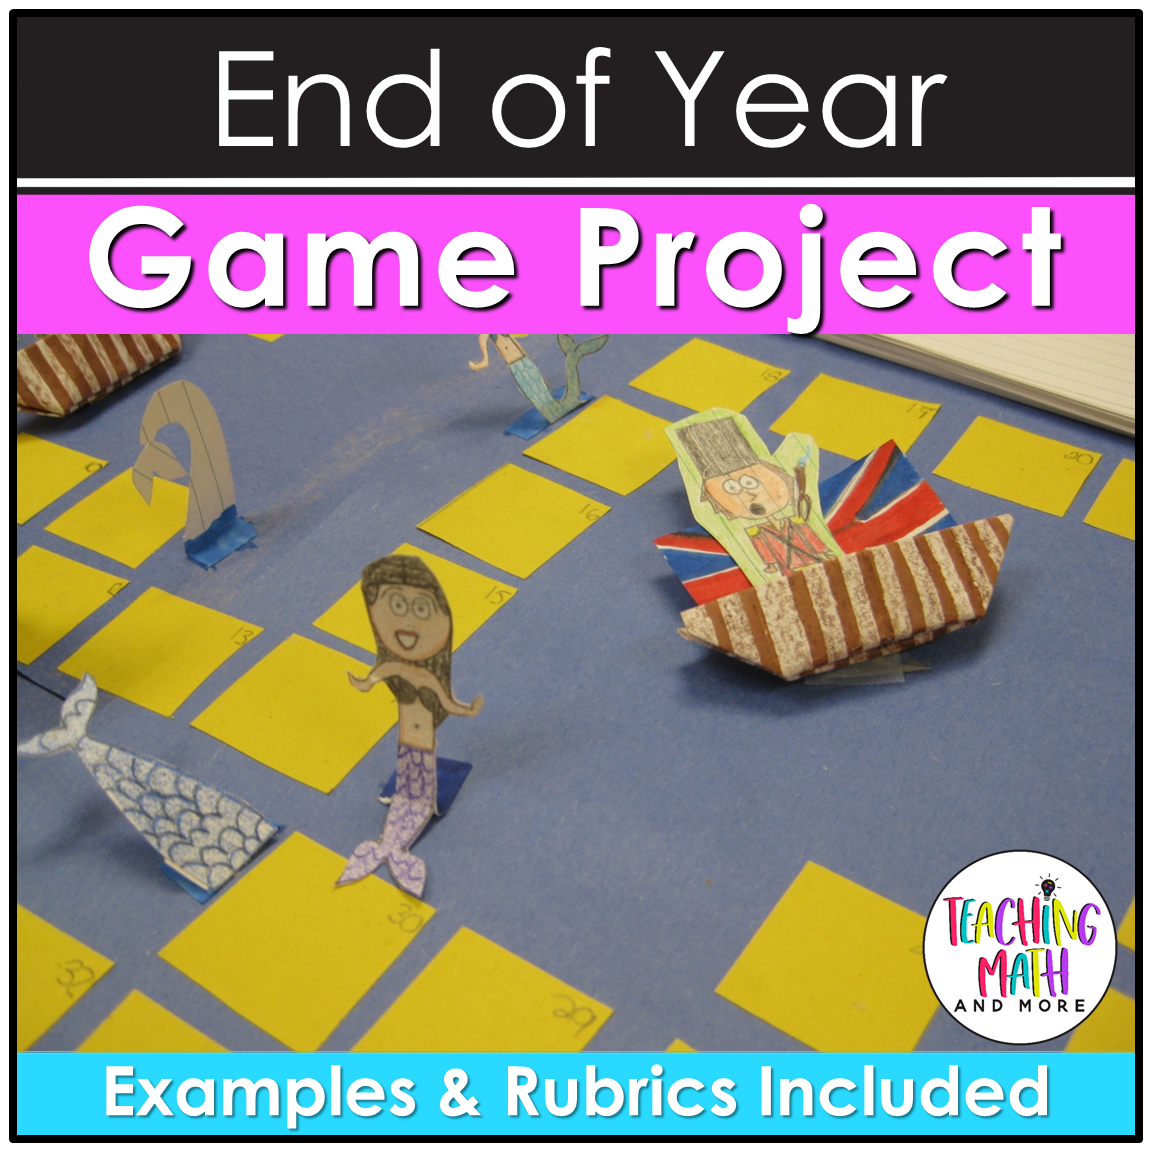 End of Year - Build a Board Game STEM Project